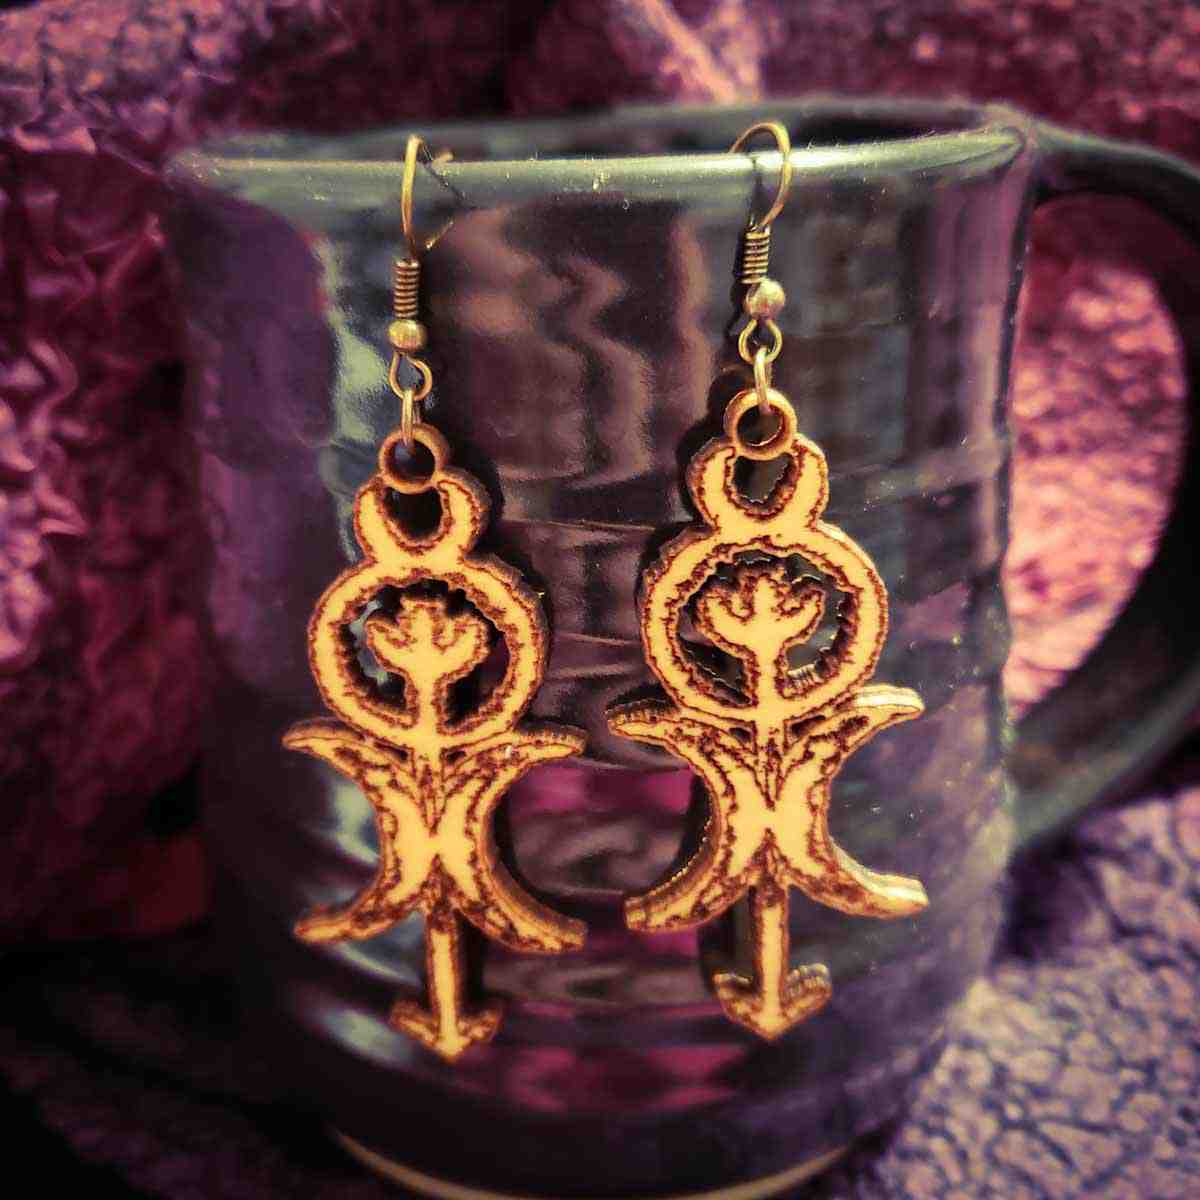 Union of God and Goddess Earrings; Melasdesign Handmade Darkness; pagan; jewelry; earrings; wiccan; symbols